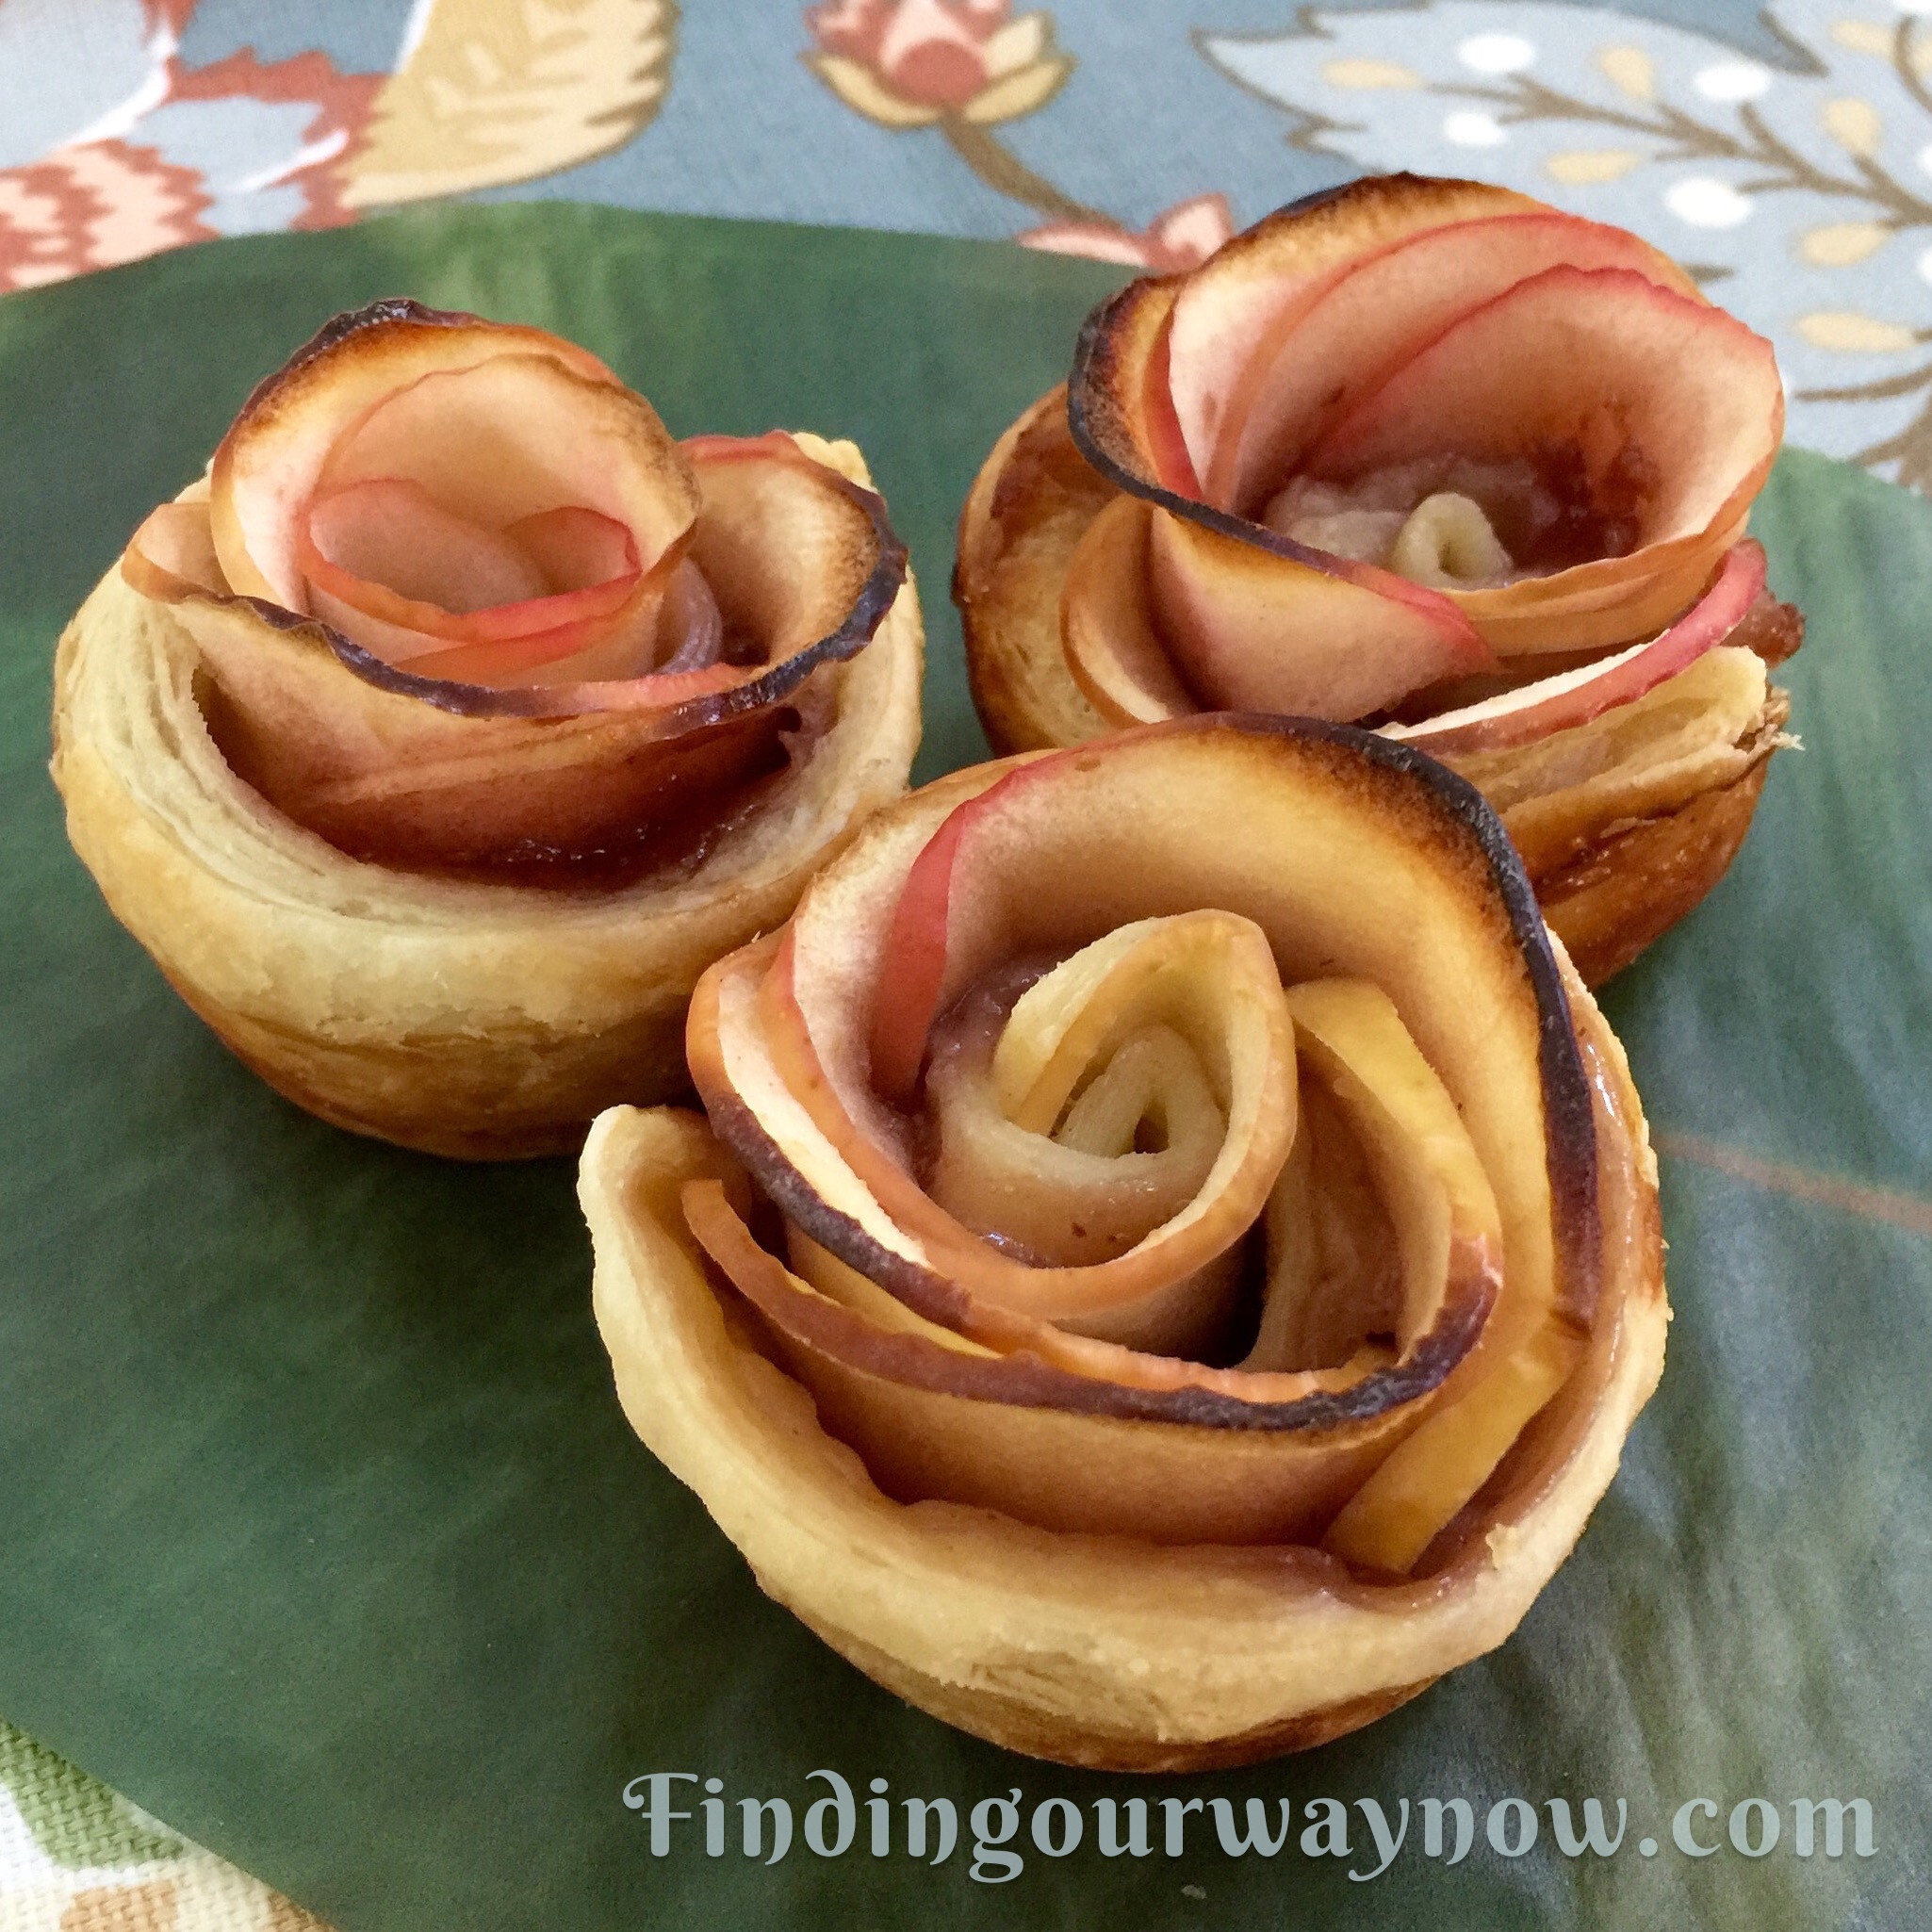 Rose Apple Desserts
 Mini Apple Rose Desserts Recipe Finding Our Way Now